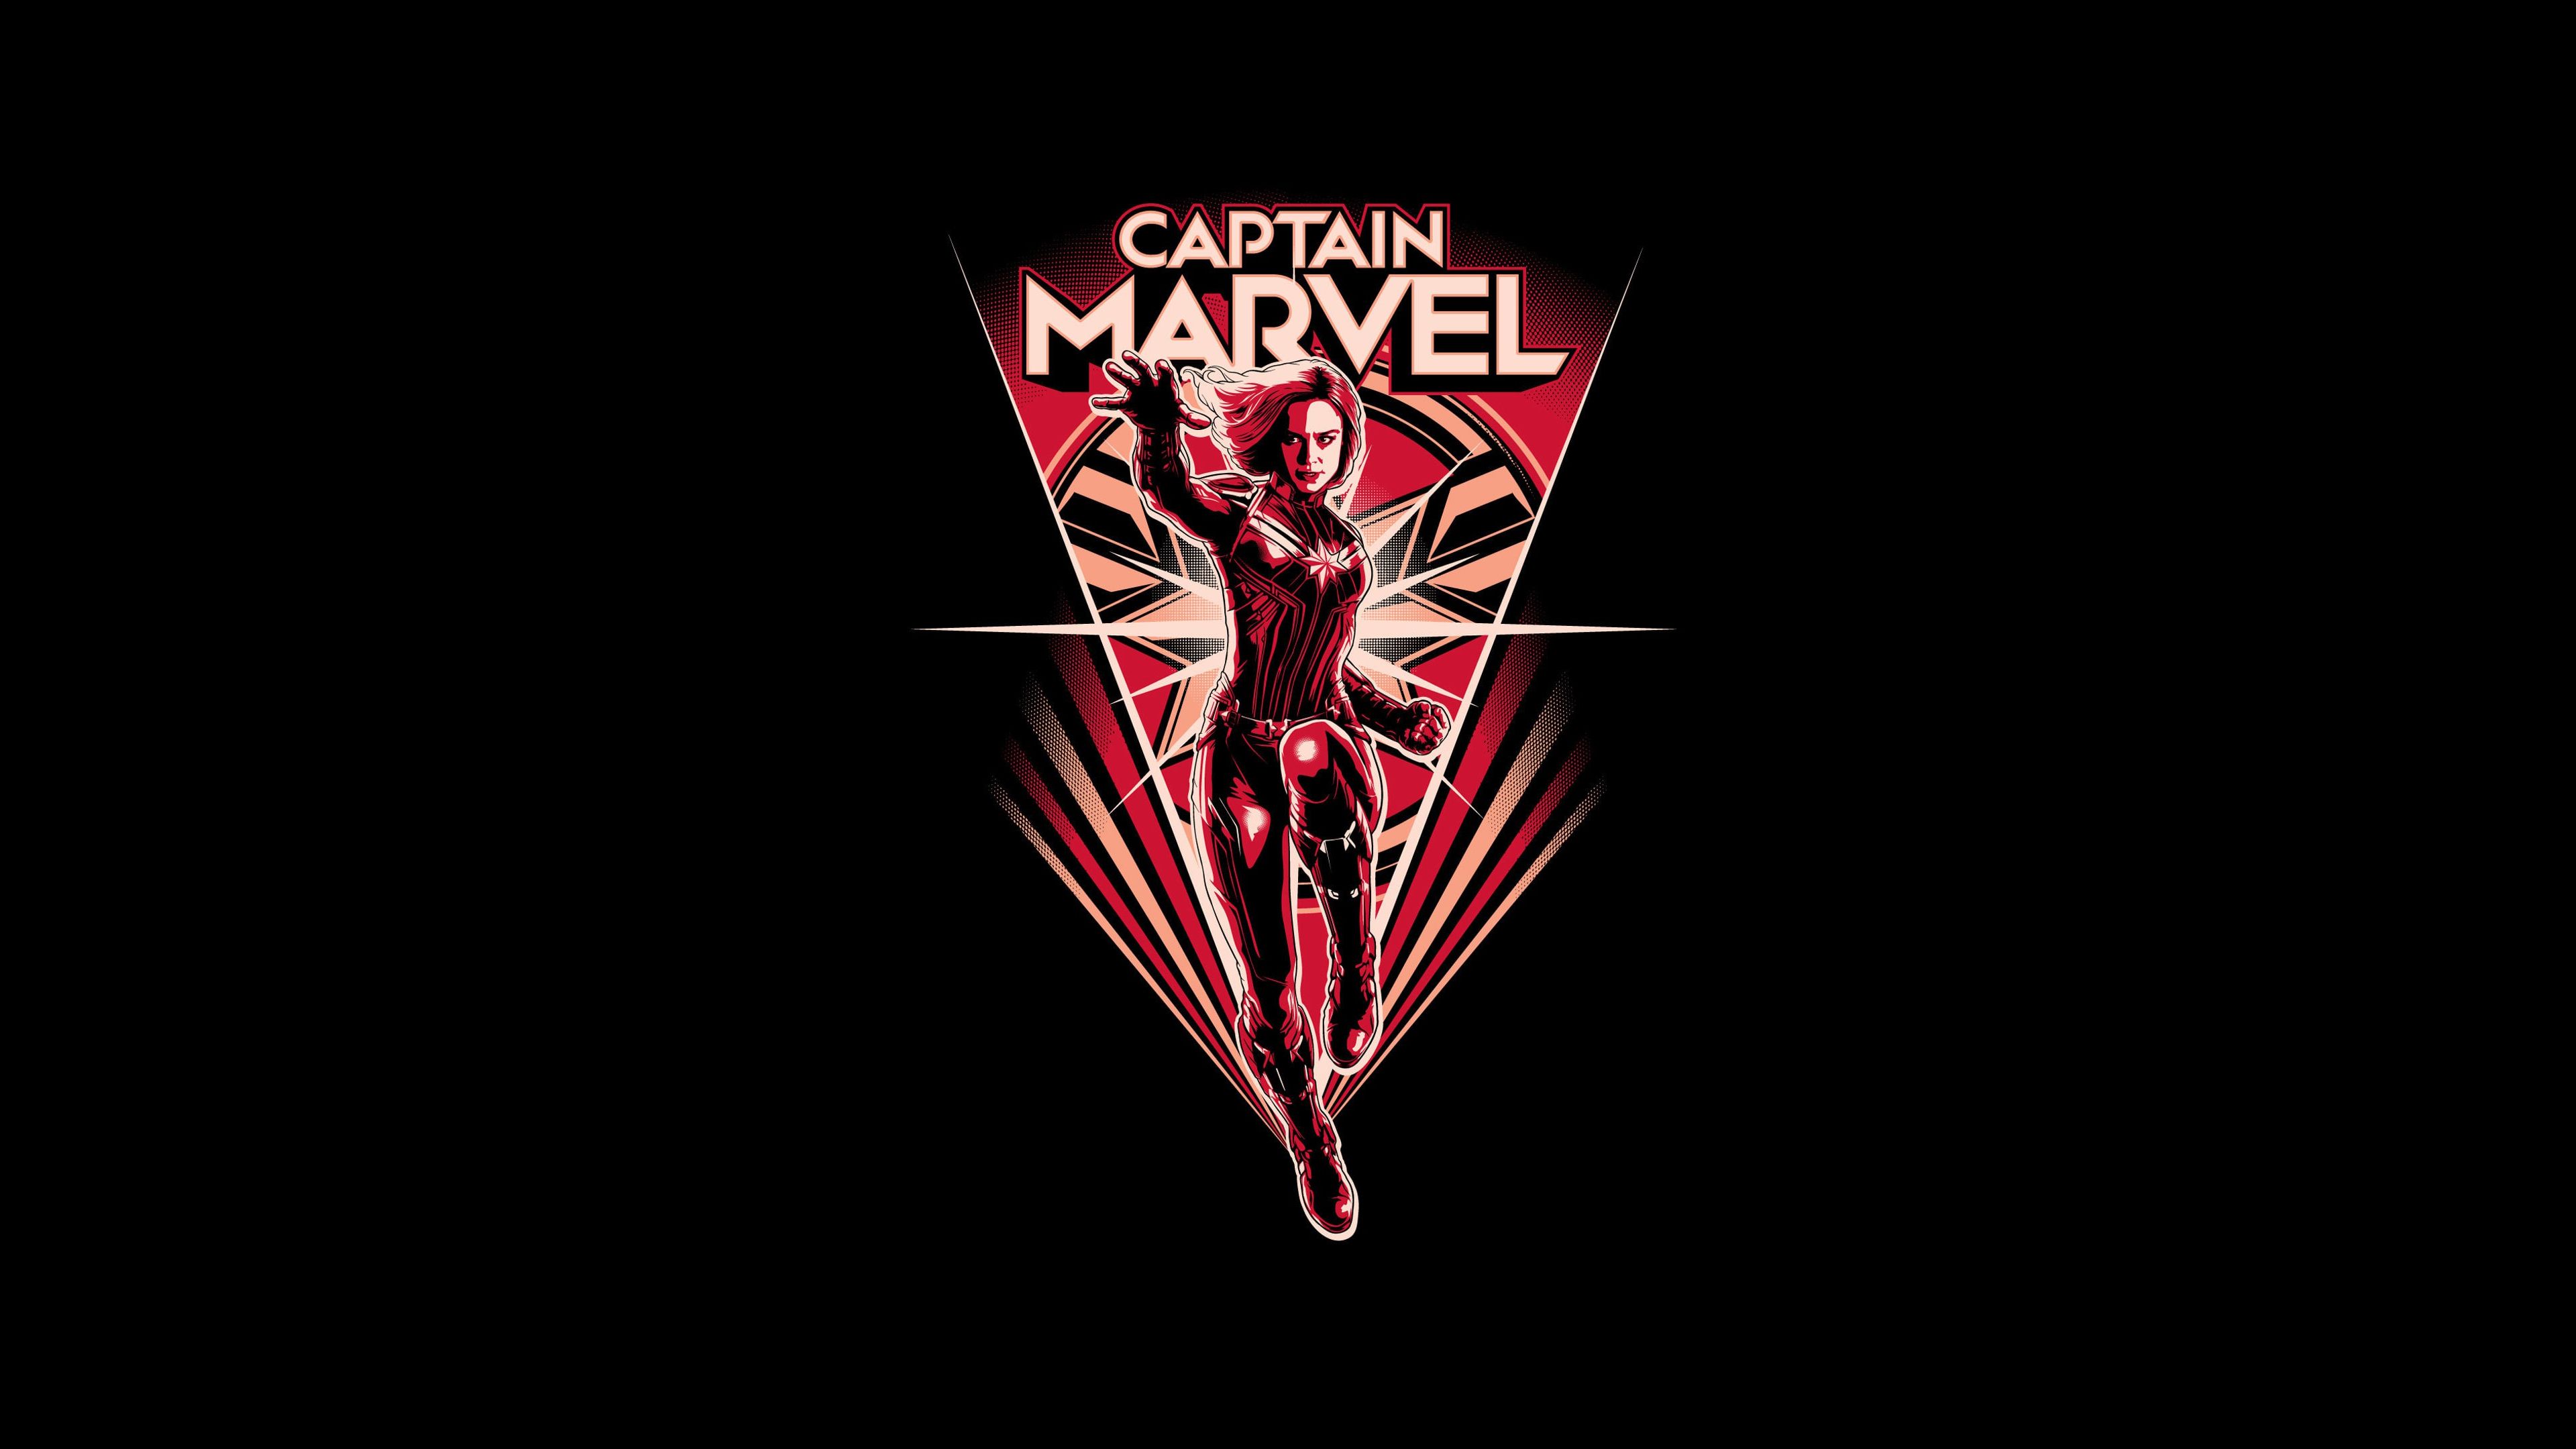 Minimal Captain Marvel 1440P Resolution Wallpaper, HD Movies 4K Wallpaper, Image, Photo and Background